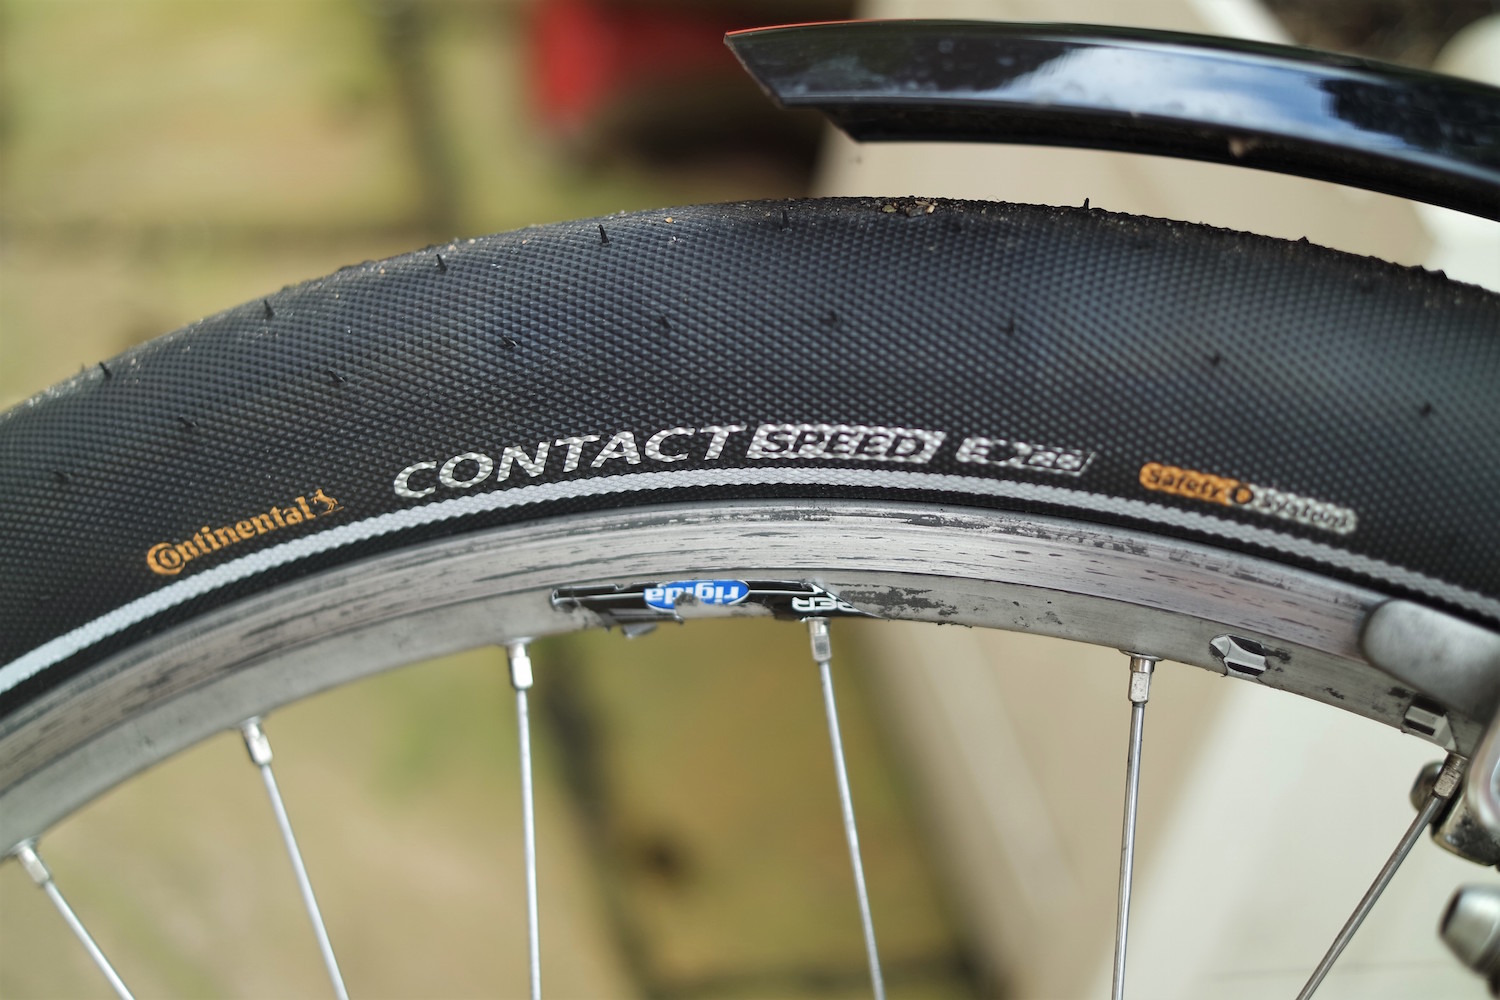 Continental Contact Speed Reflex Bicycle Cycle Bike Tyres Black 